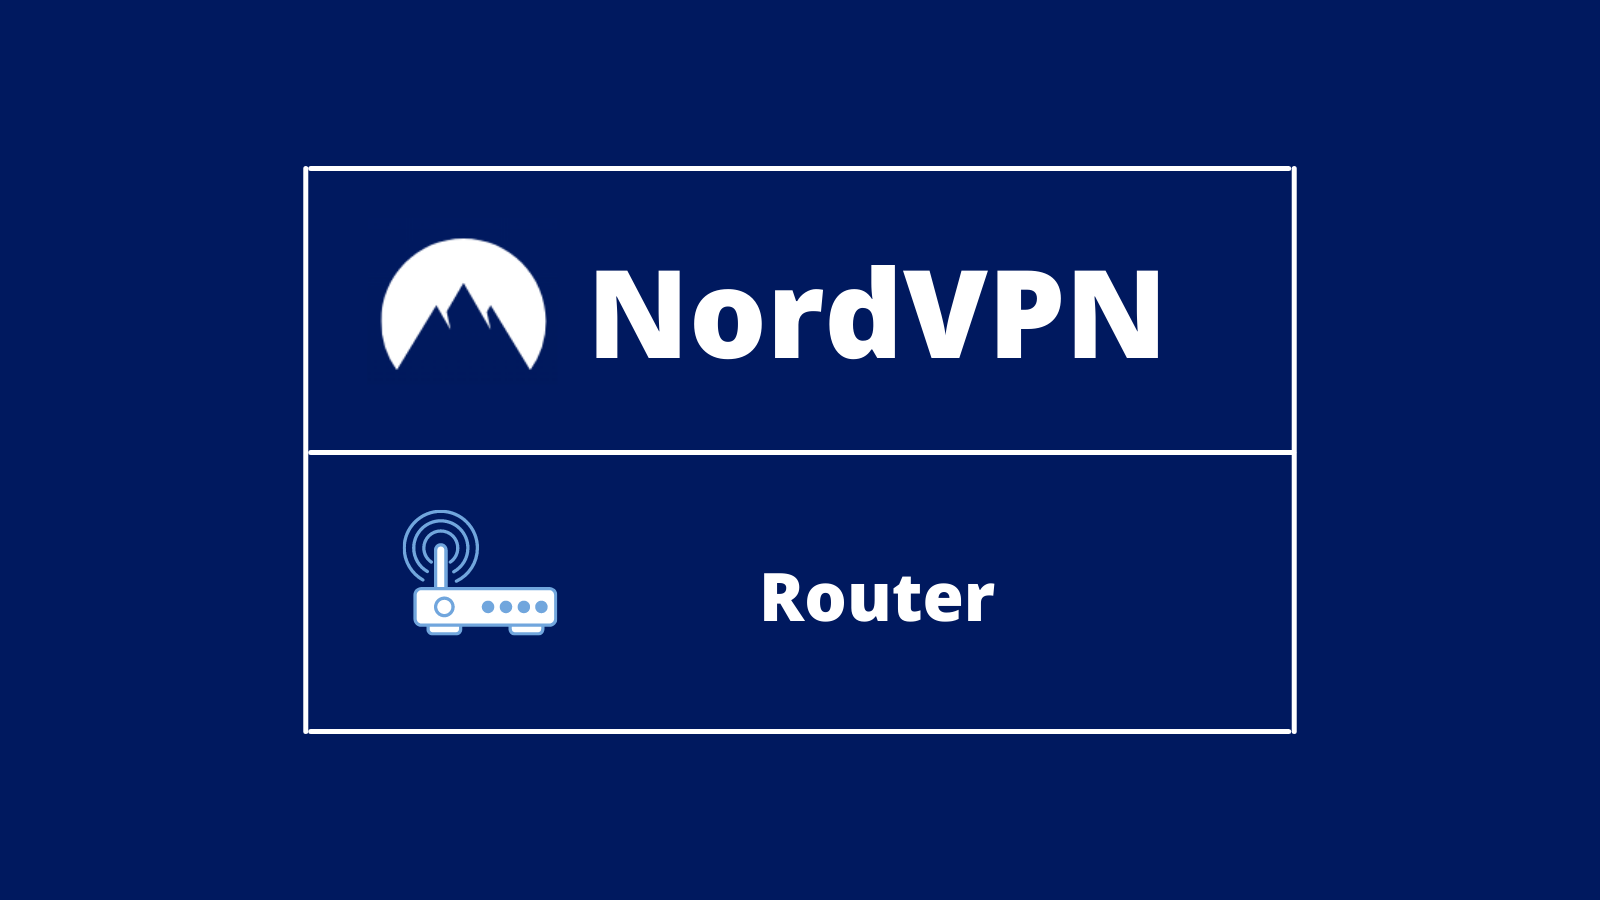 nordvpn and torrenting